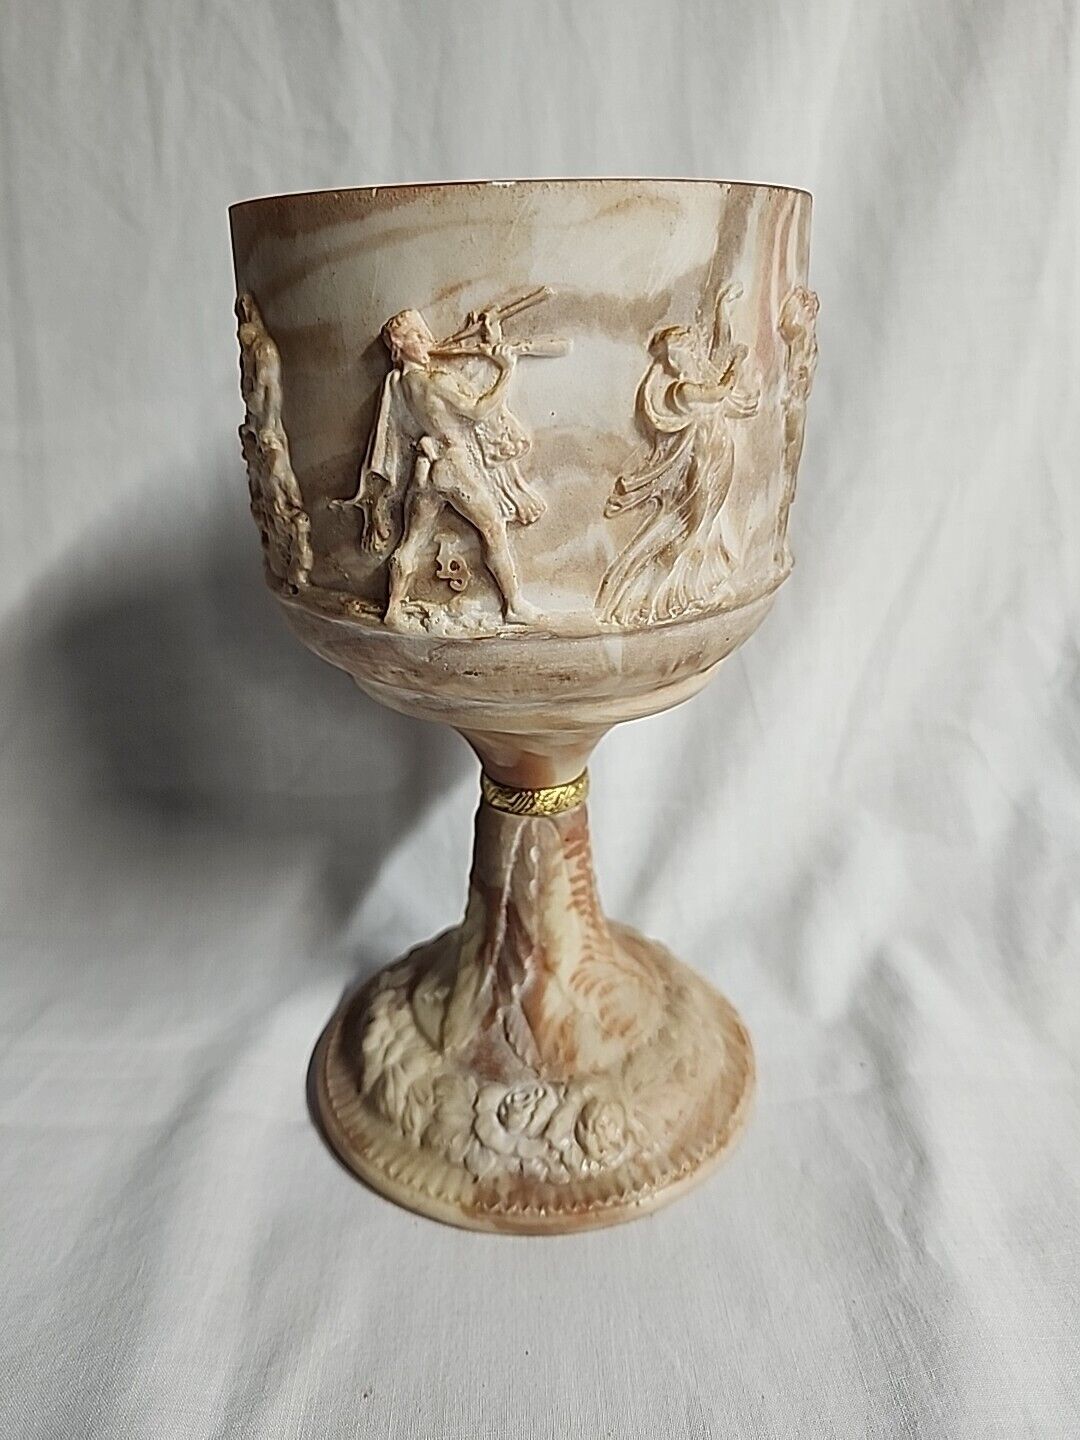 VINTAGE INCOLAY STONE CHALICE/GOBLET CUP MADE IN THE USA ROSE PINK CREAM ROMAN 